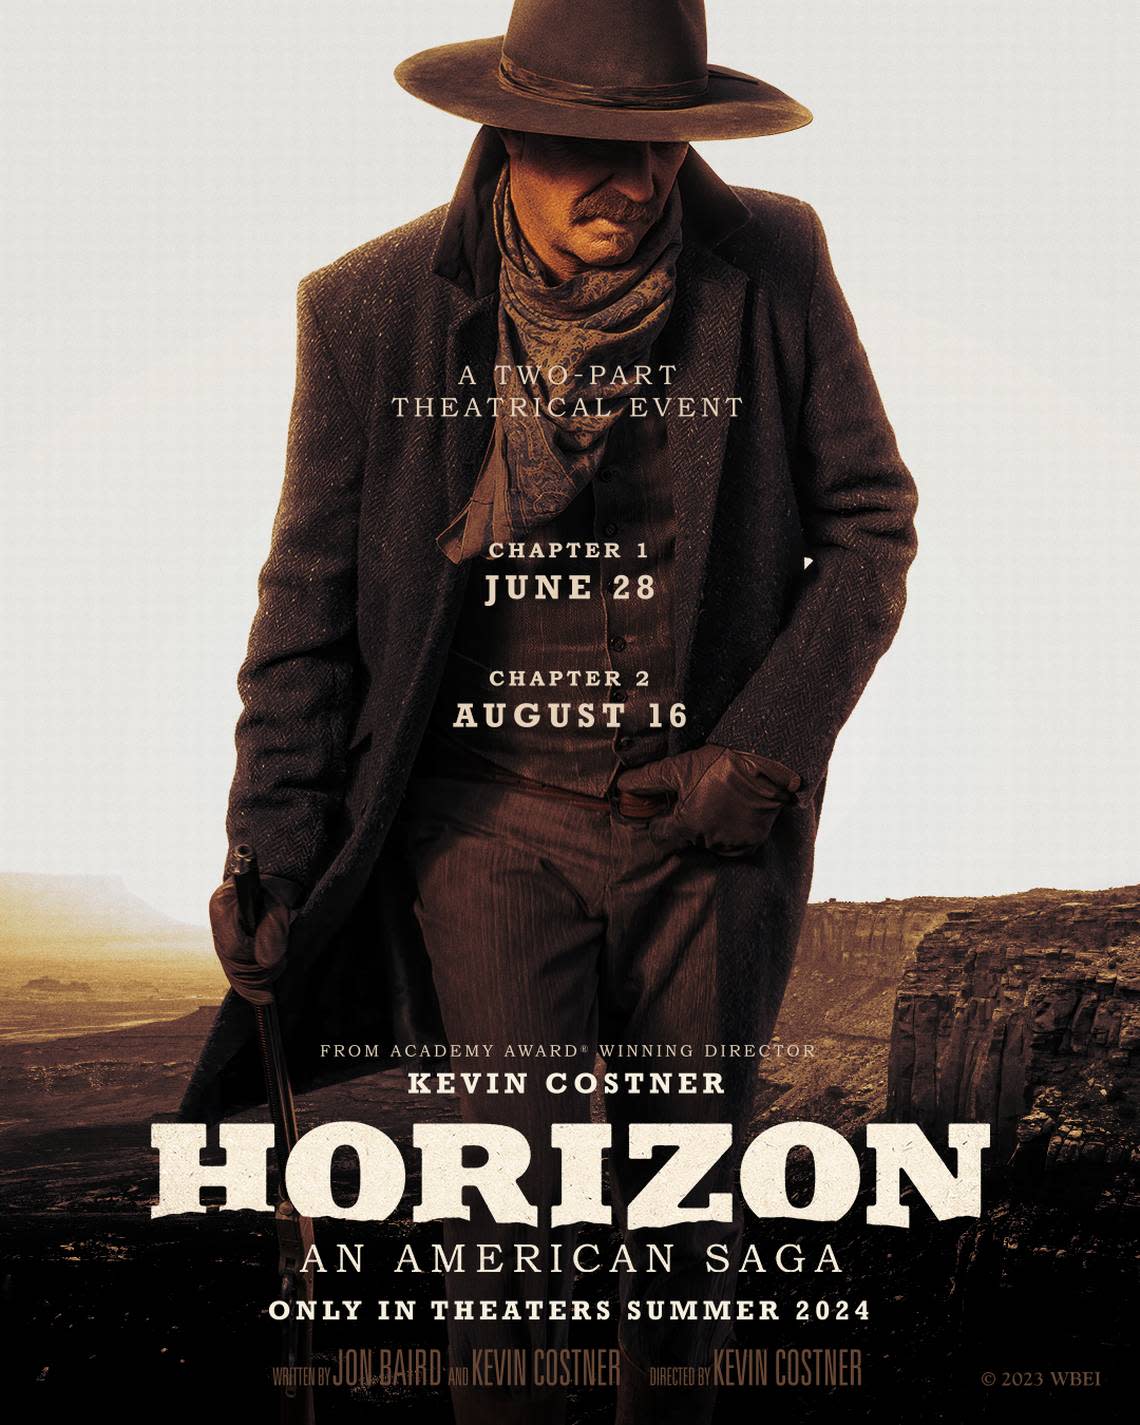 The first poster for Kevin Costner’s “Horizon: An American Saga”.